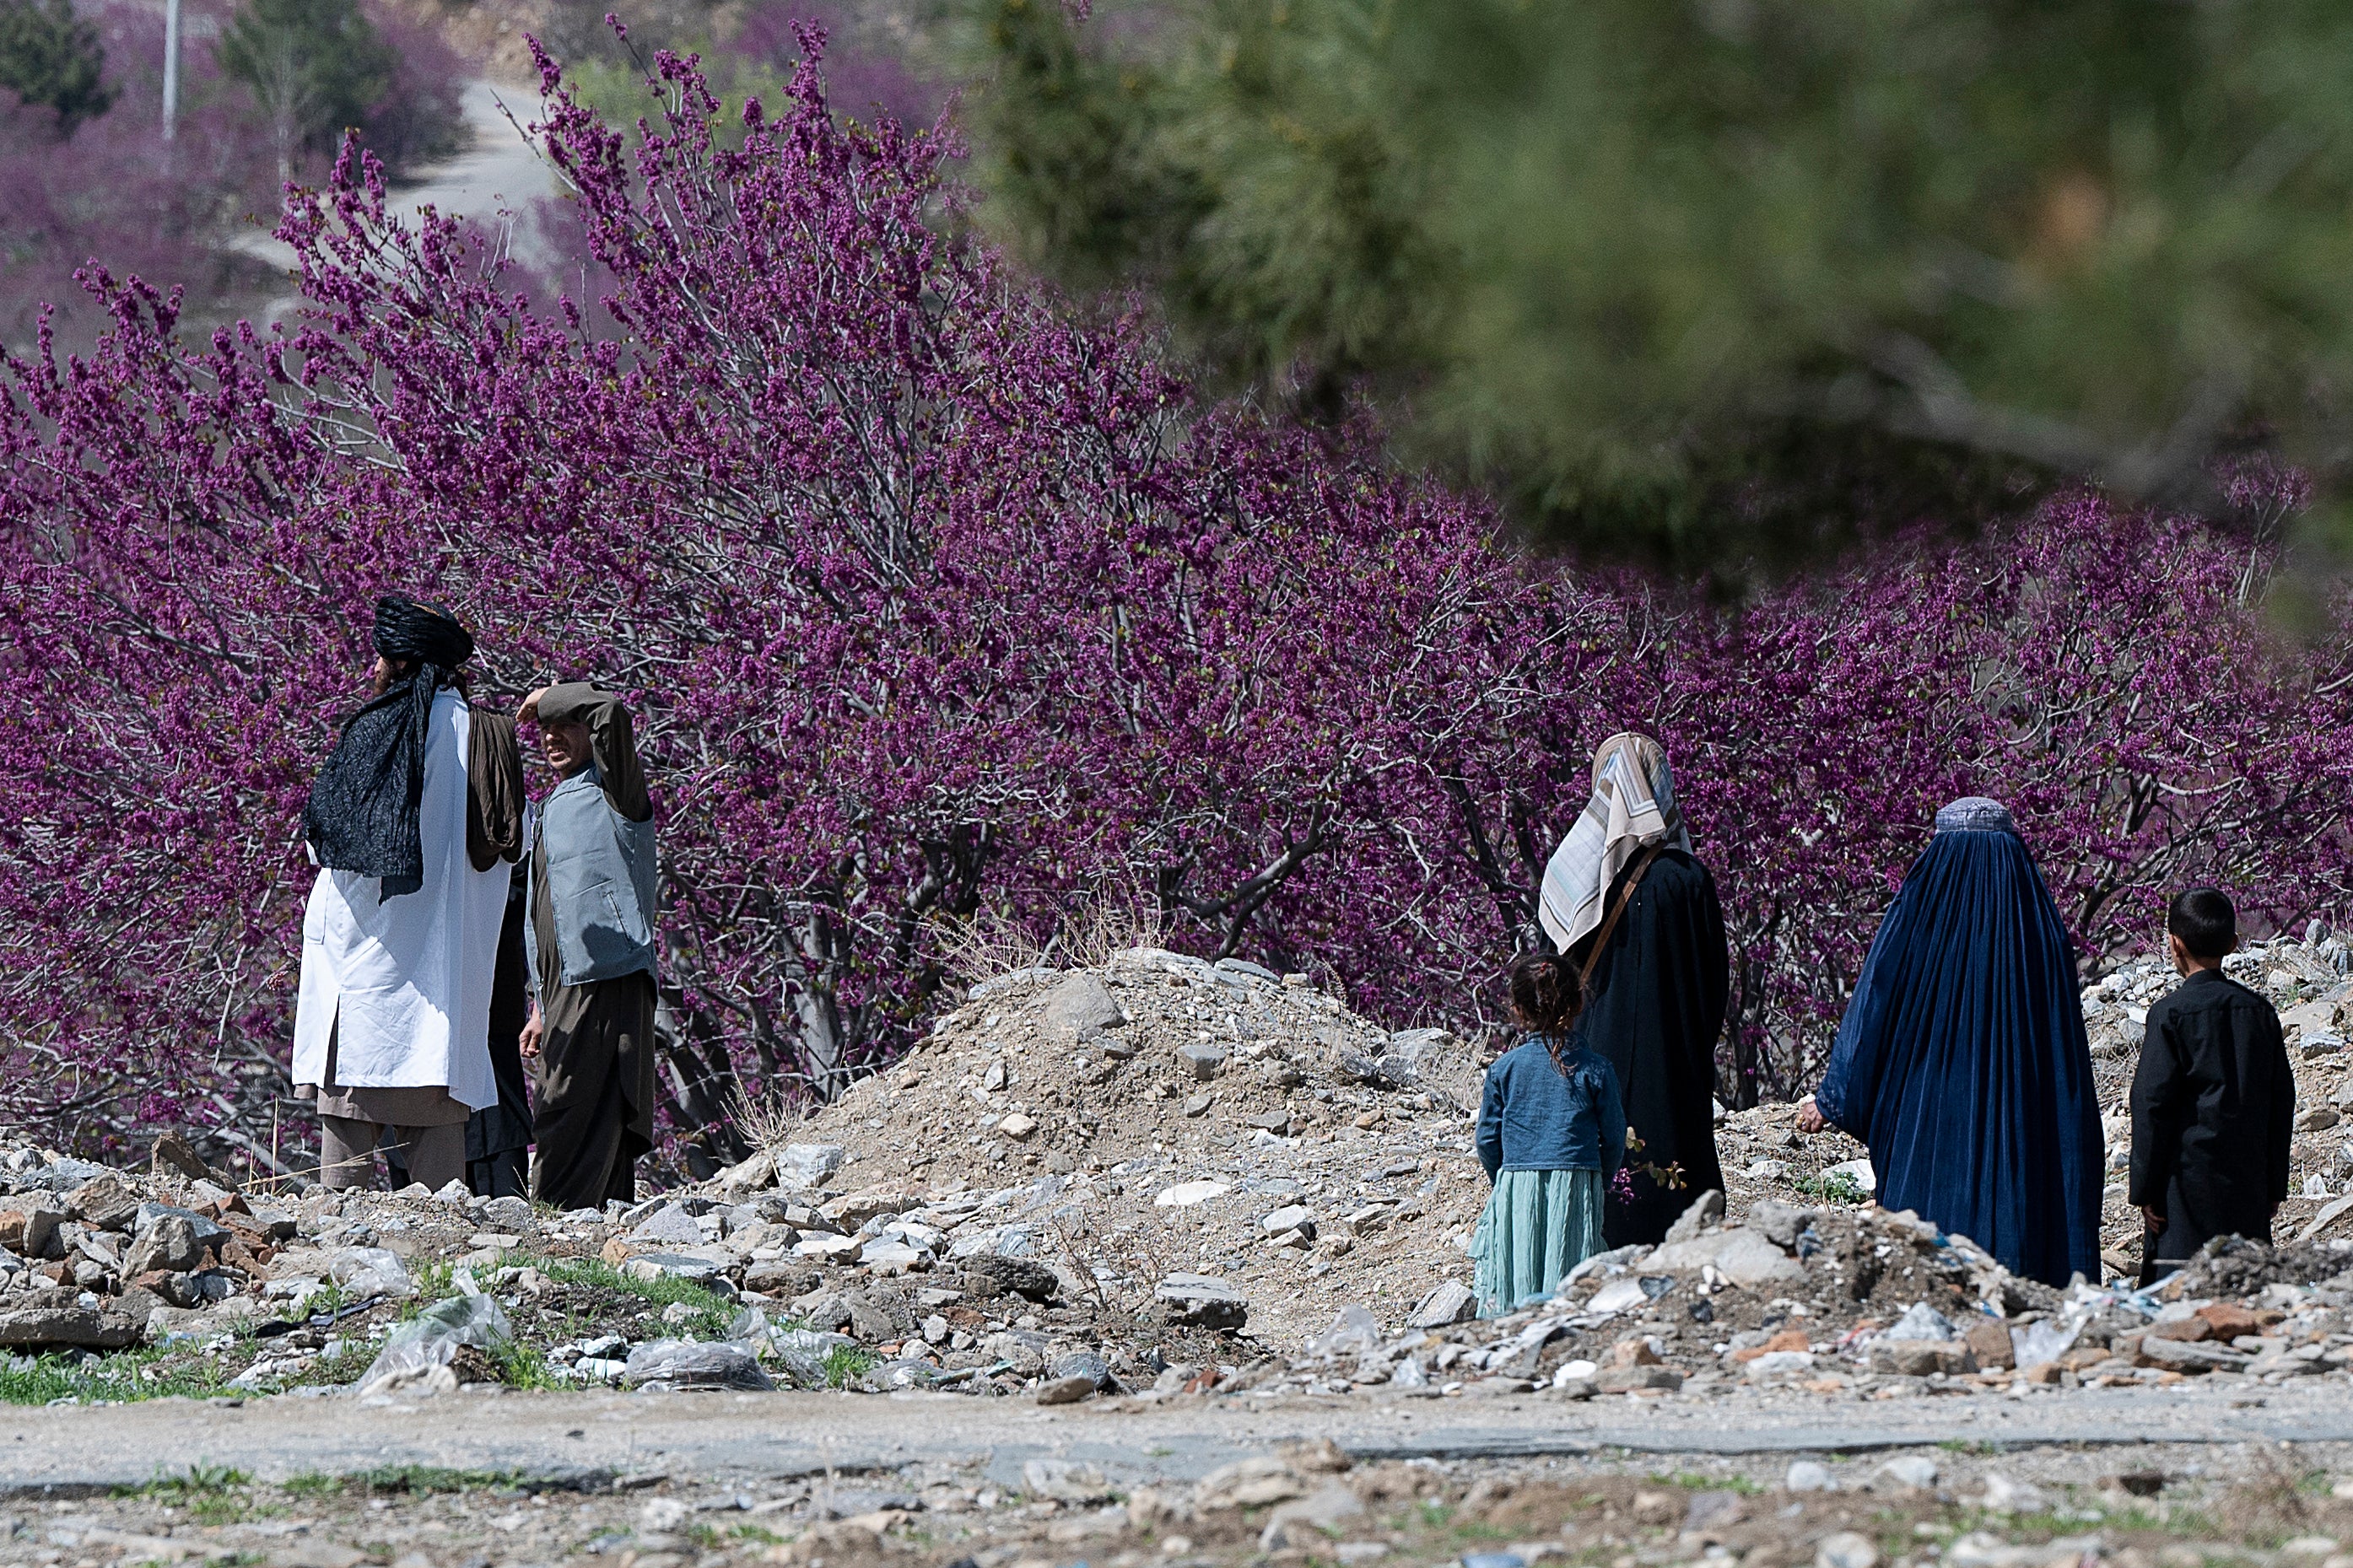 Women and children are barred from visiting a recreational park in Charikar, Parwan Province